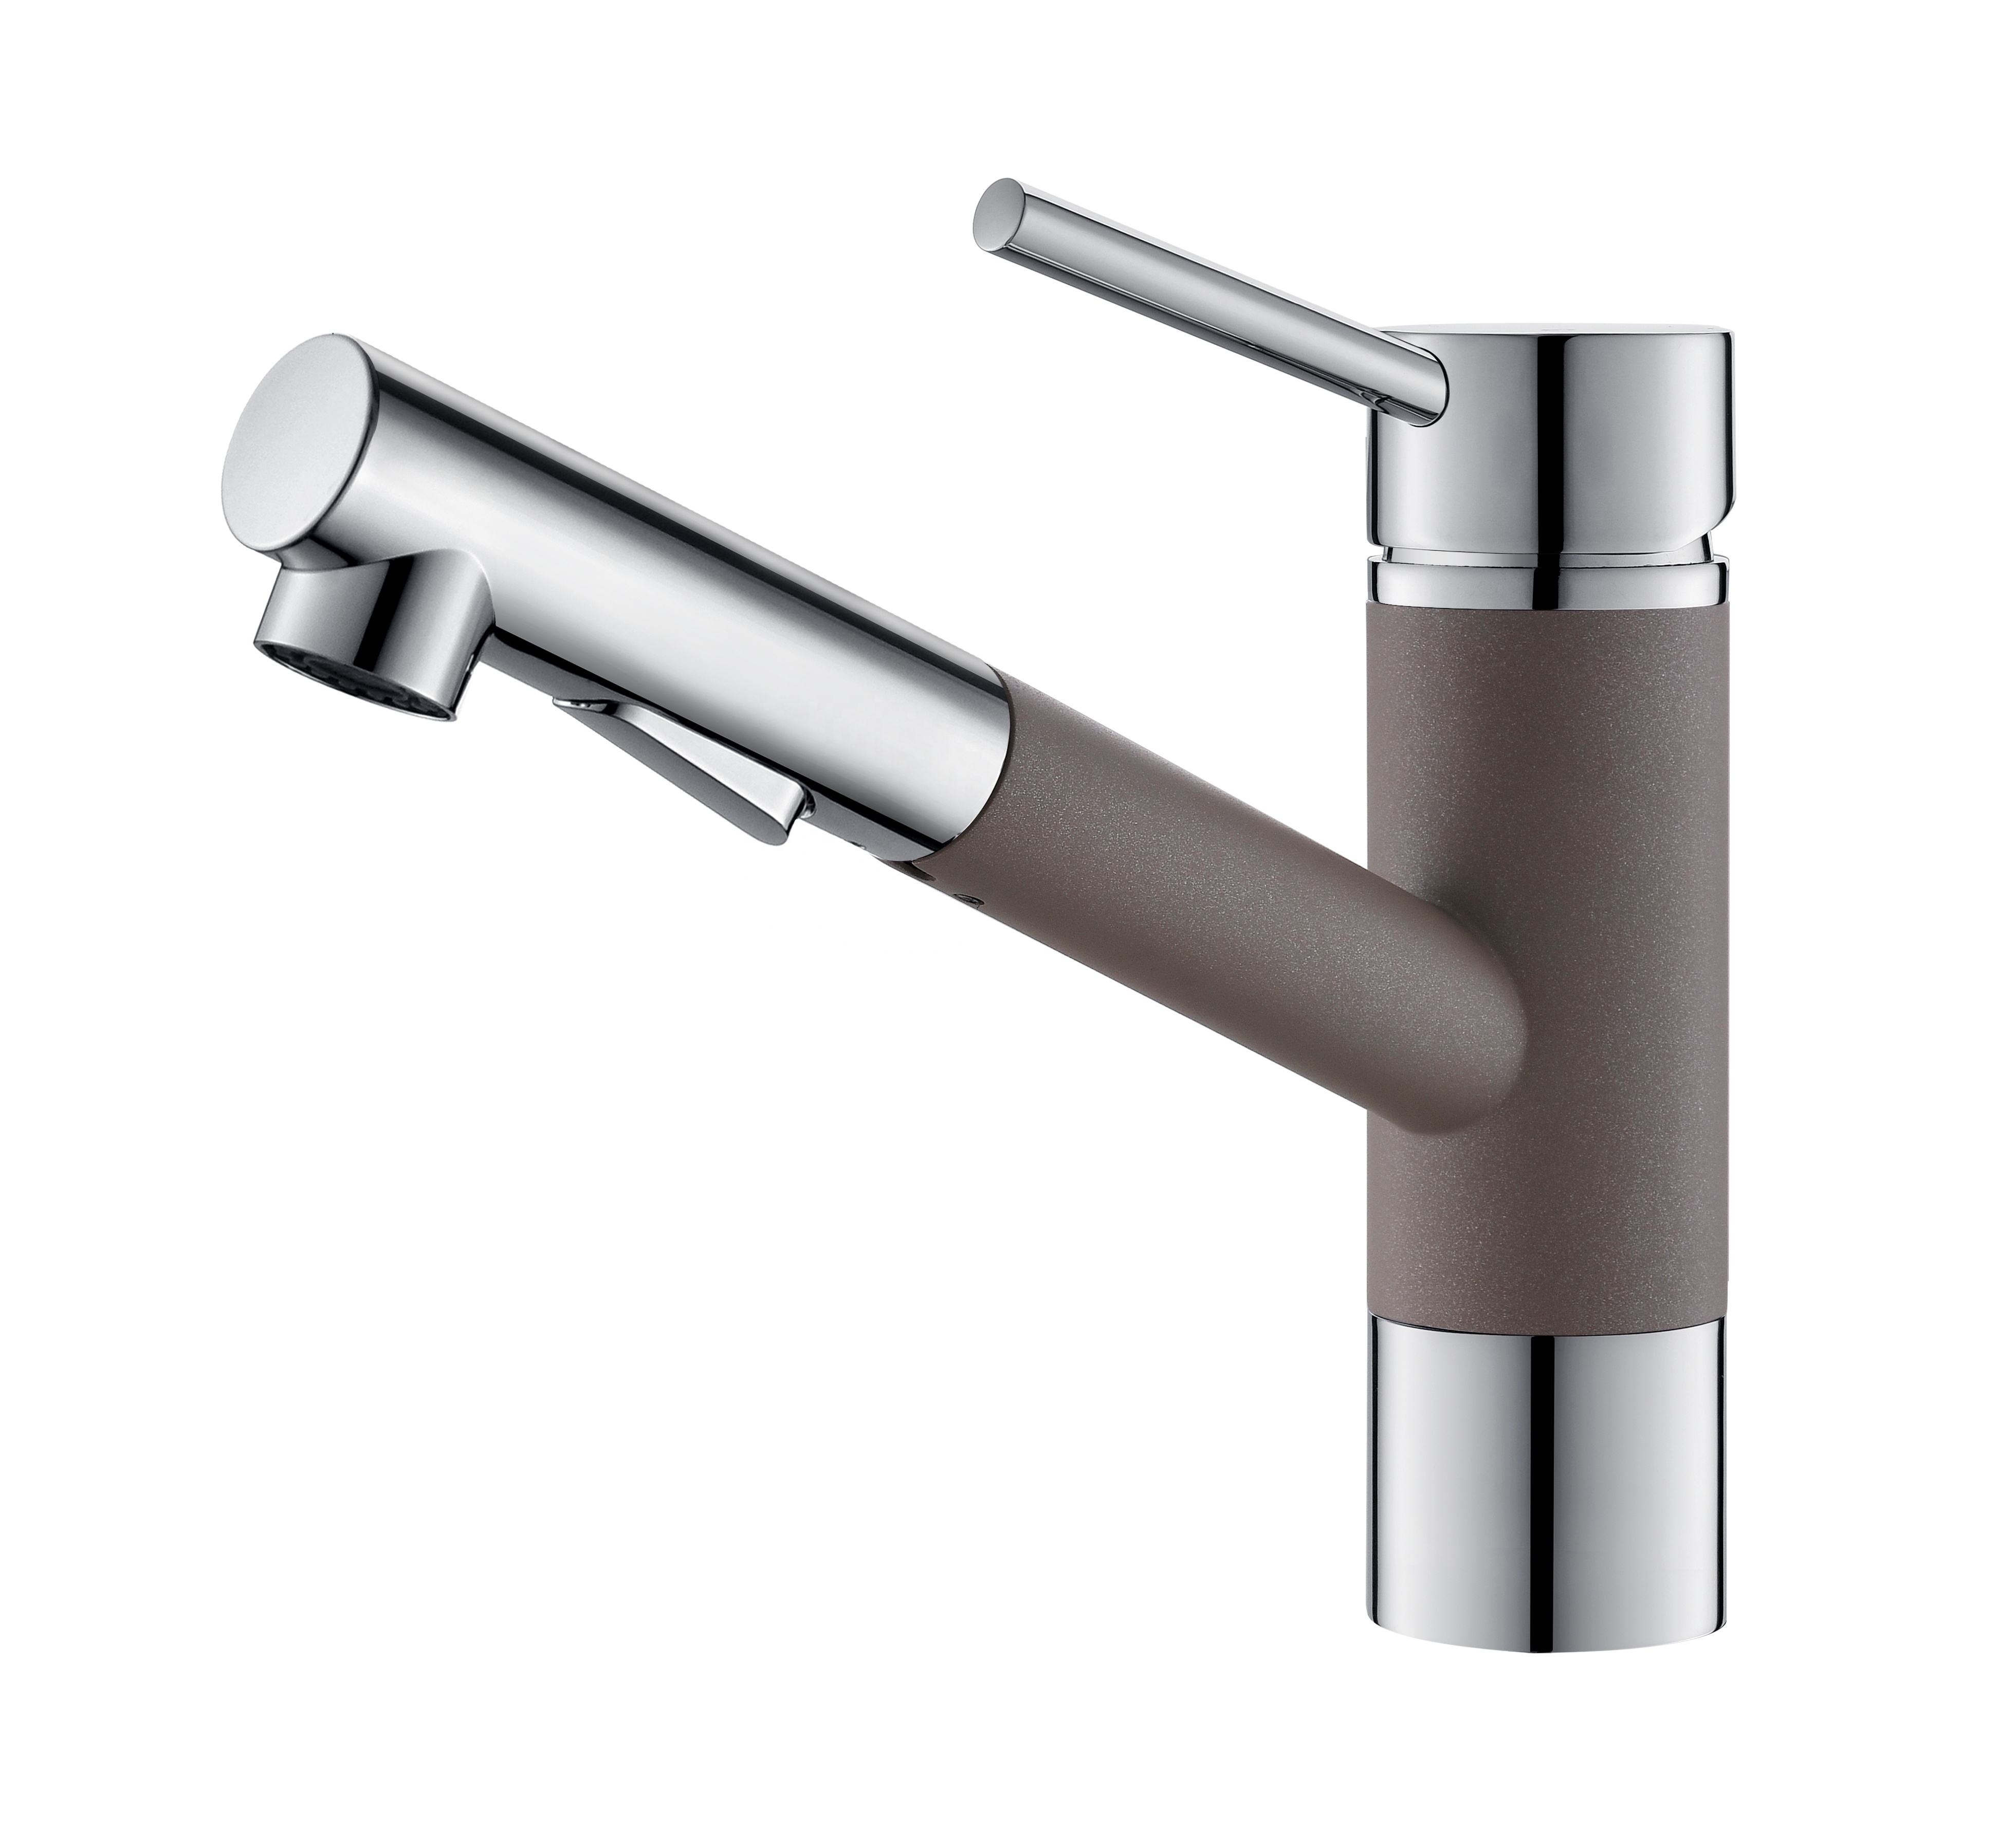 Contemporary Stainless Steel Pull Out Kitchen Faucets Taps Kitchen Sink Faucets